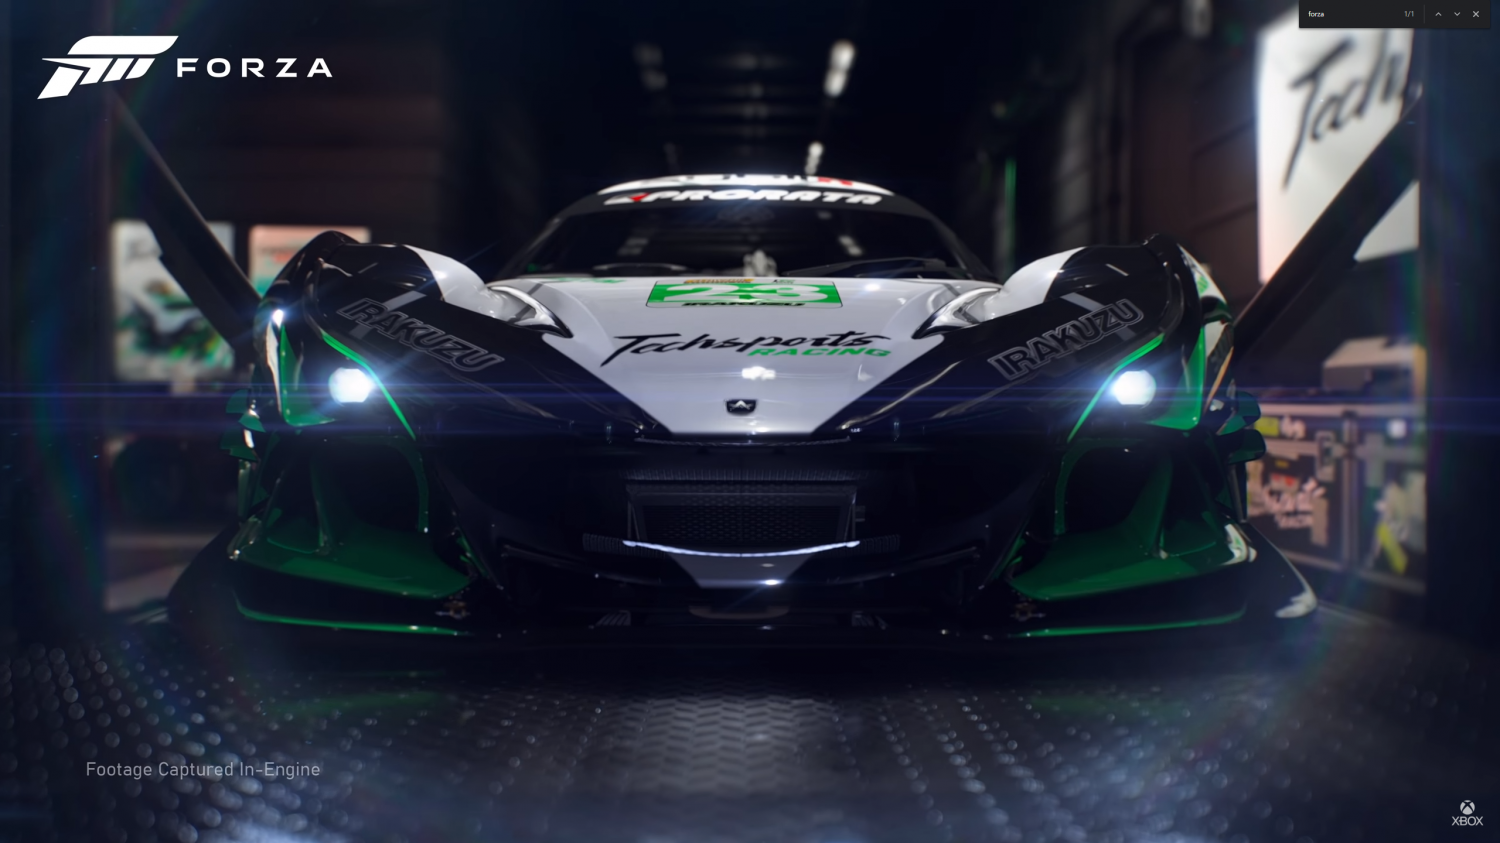 Forza Motorsport 6 Install Size Revealed; All these Impressive Details Make  for one Big Game